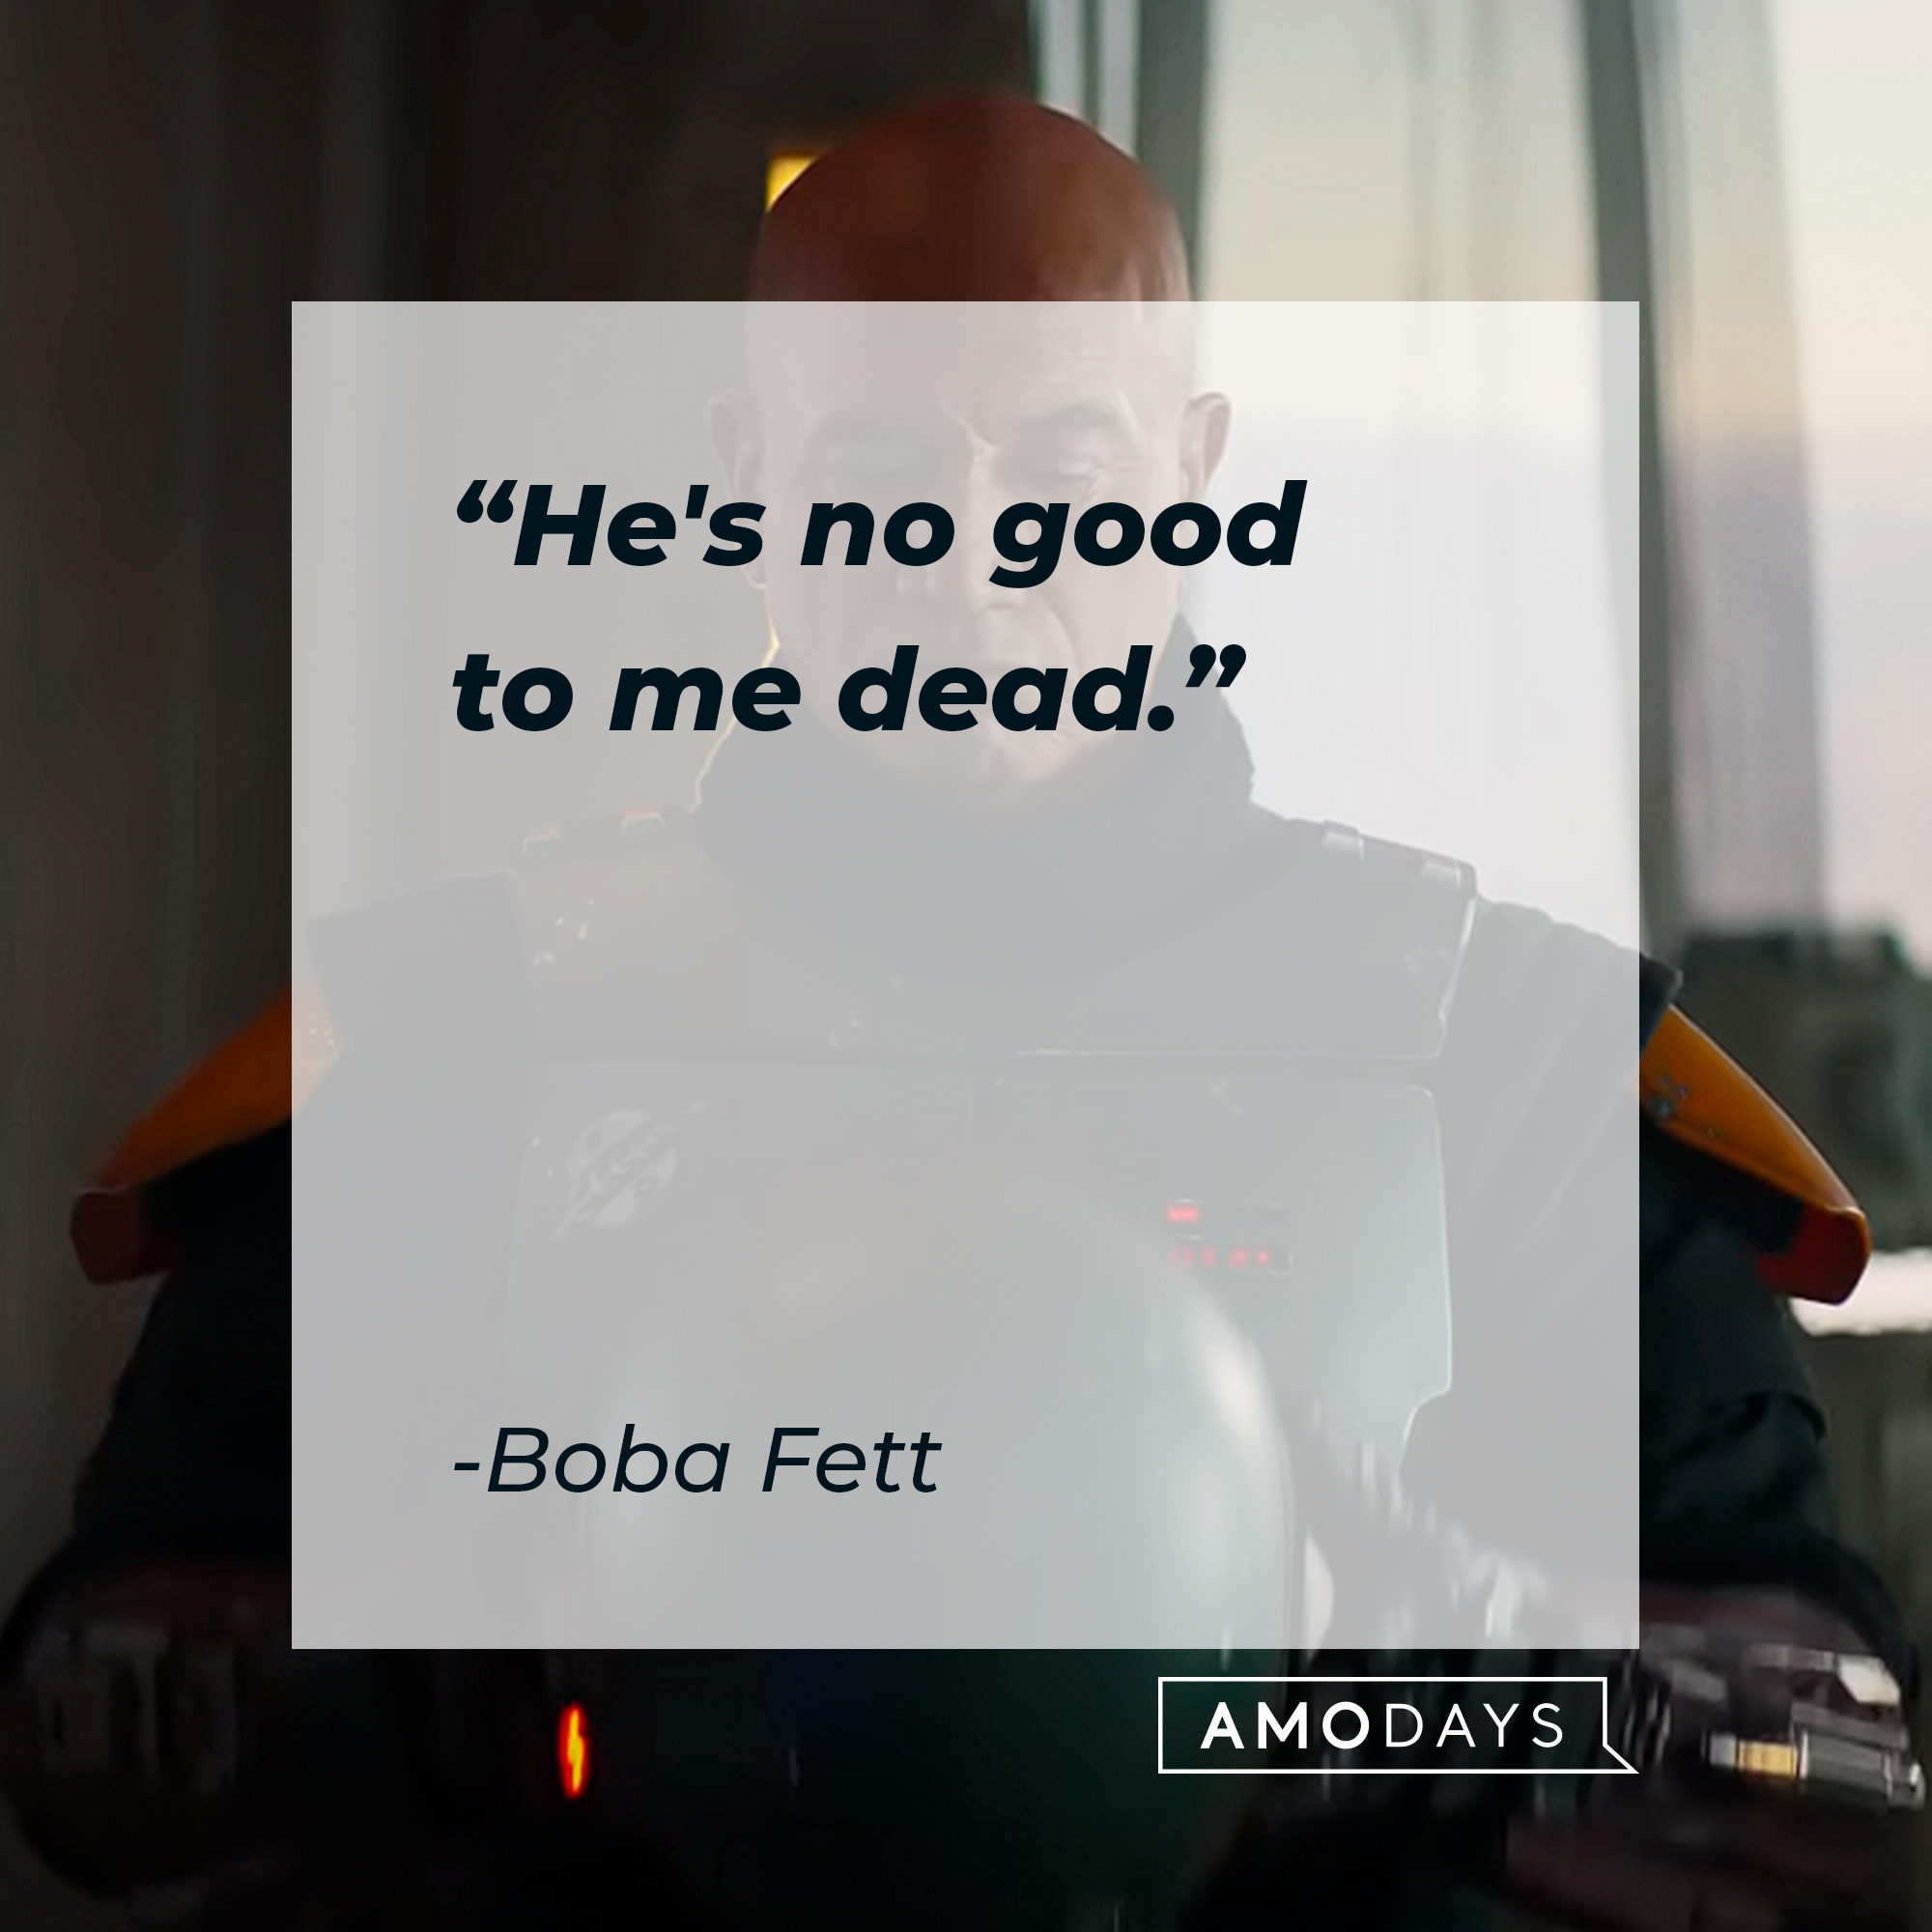 Boba Fett, with his quote: “He’s no good to me dead."│ Source: youtube.com/StarWars